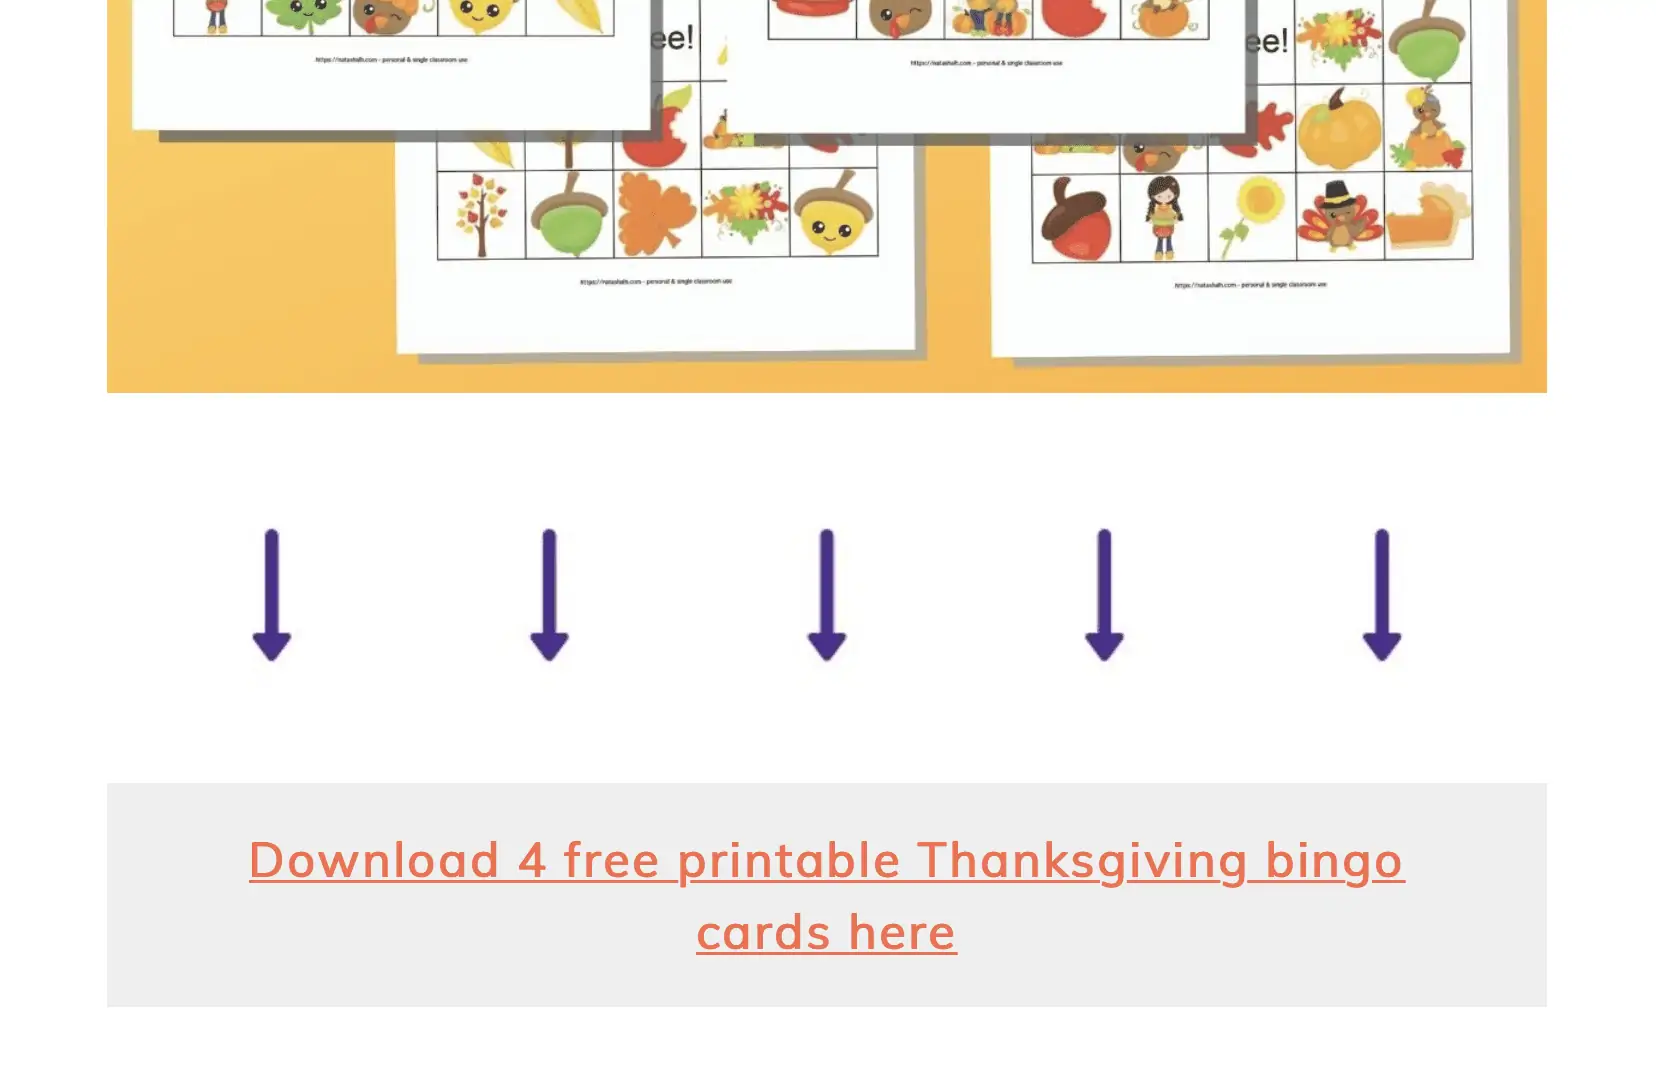 where to download Thanksgiving bingo cards